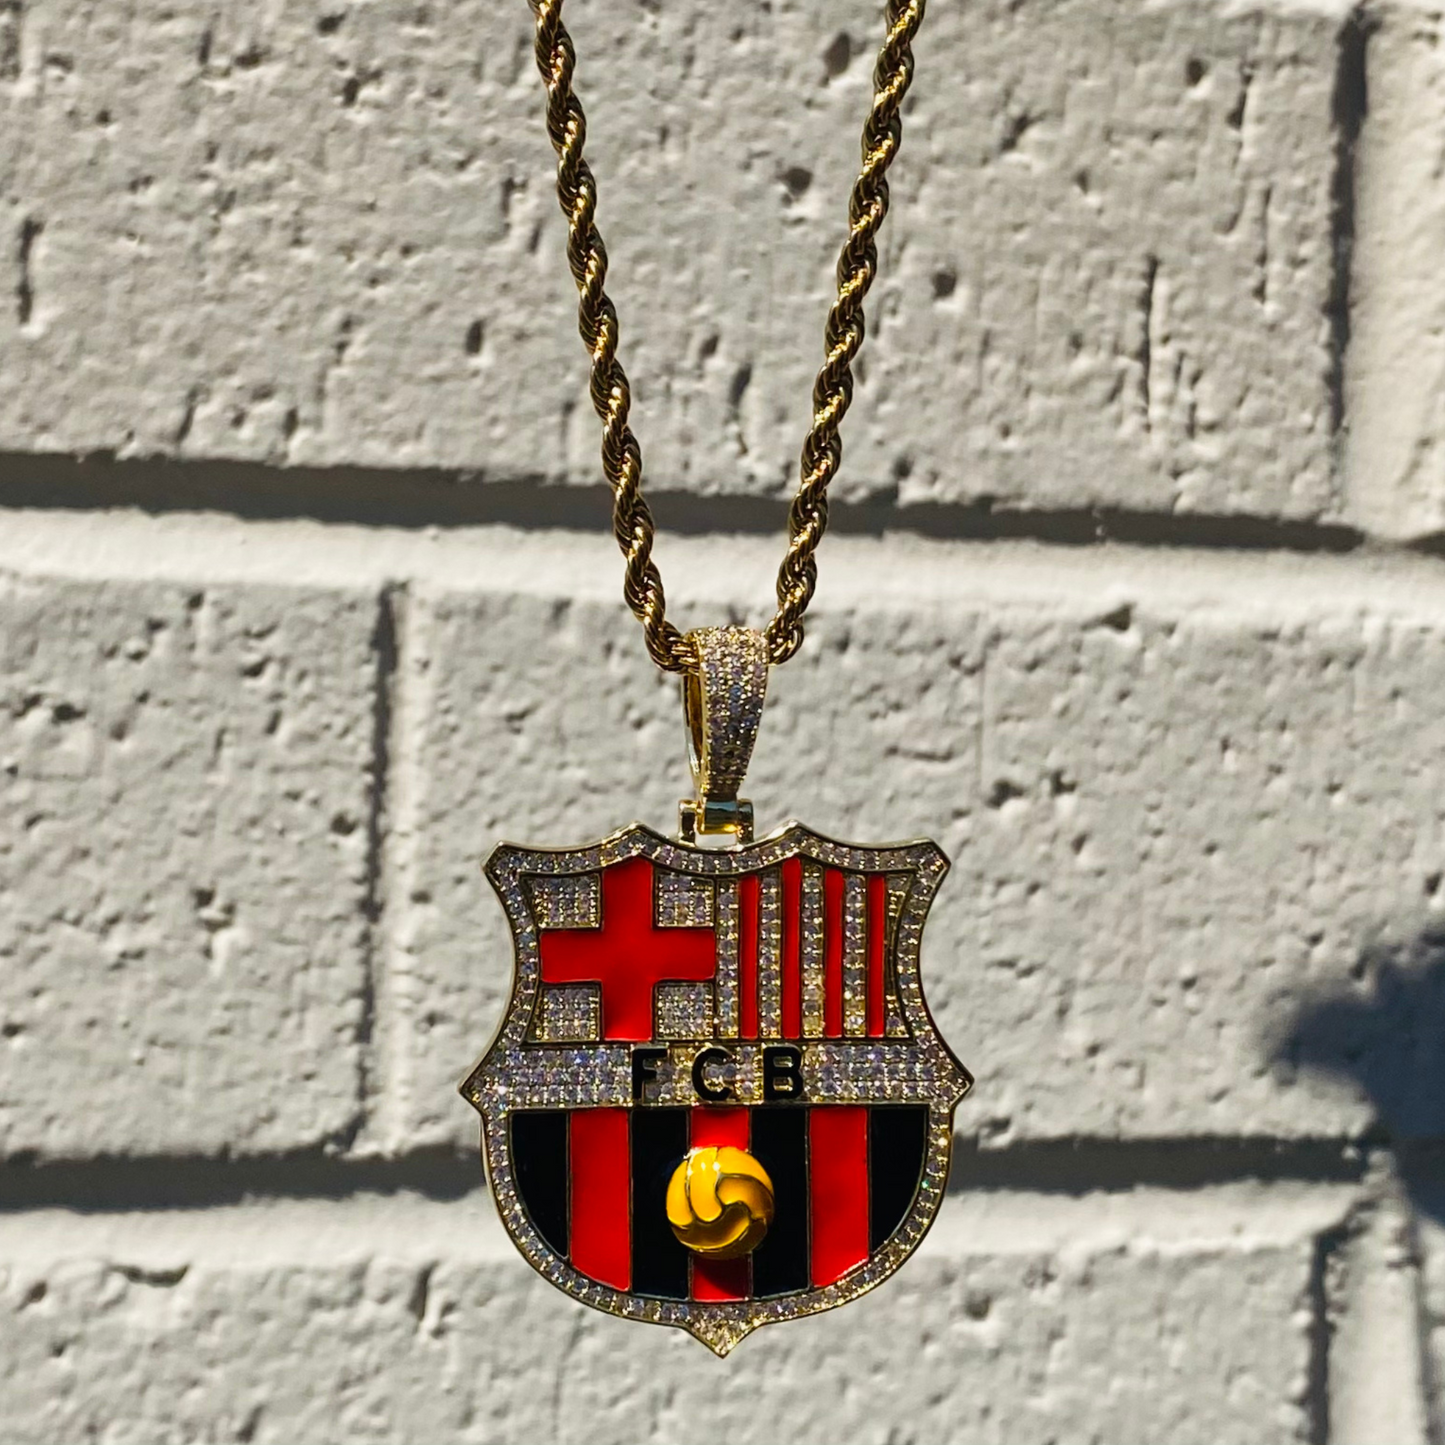 FC Barcelona necklace with Real Madrid badge pendant. Soccer Necklace.